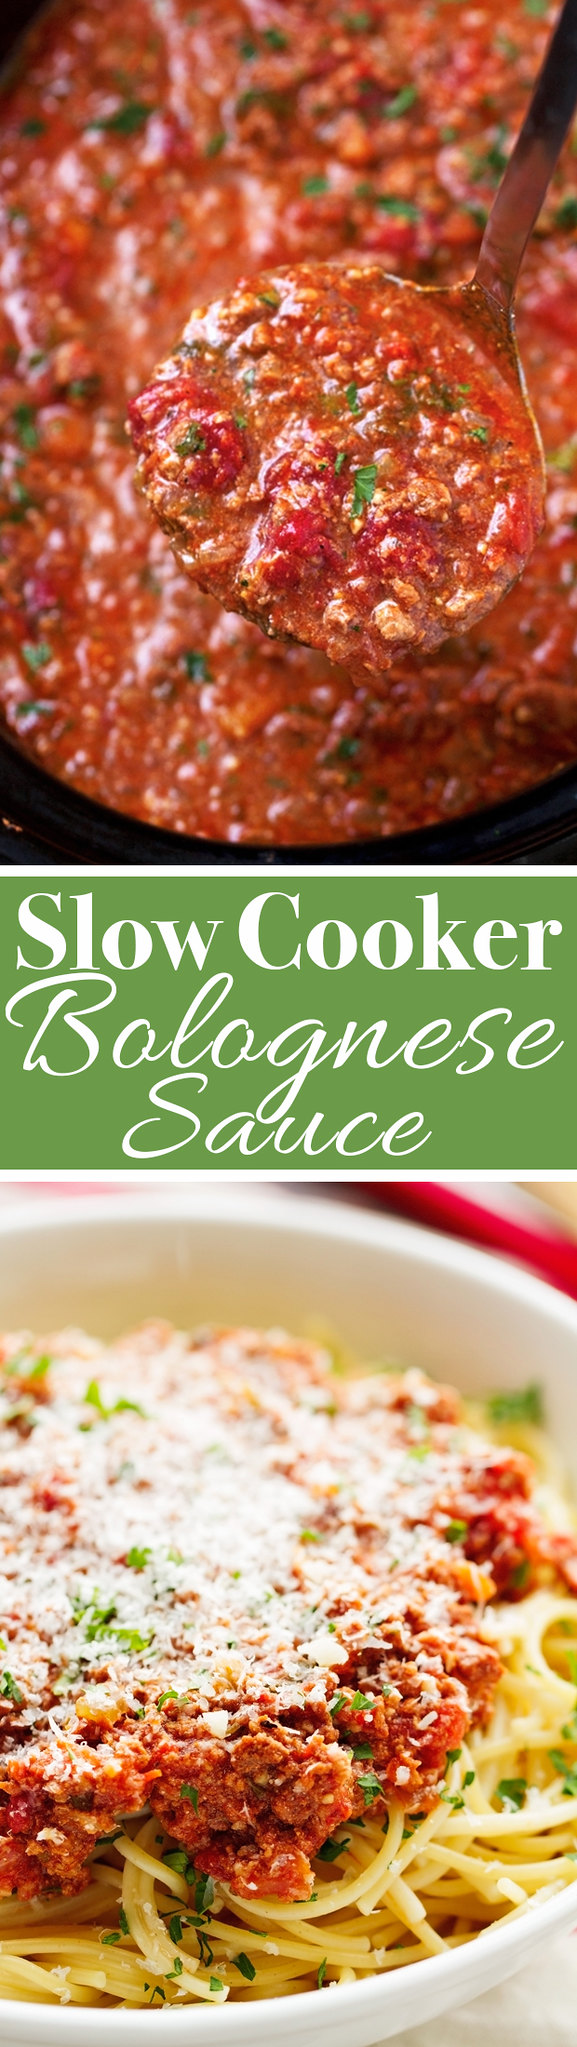 Slow Cooker Bolognese Sauce - made with simple ingredients but it's the best meat sauce you'll ever experience! #meatsauce #bolognesesauce #slowcooker #slowcookerbolognesesauce | Littlespicejar.com